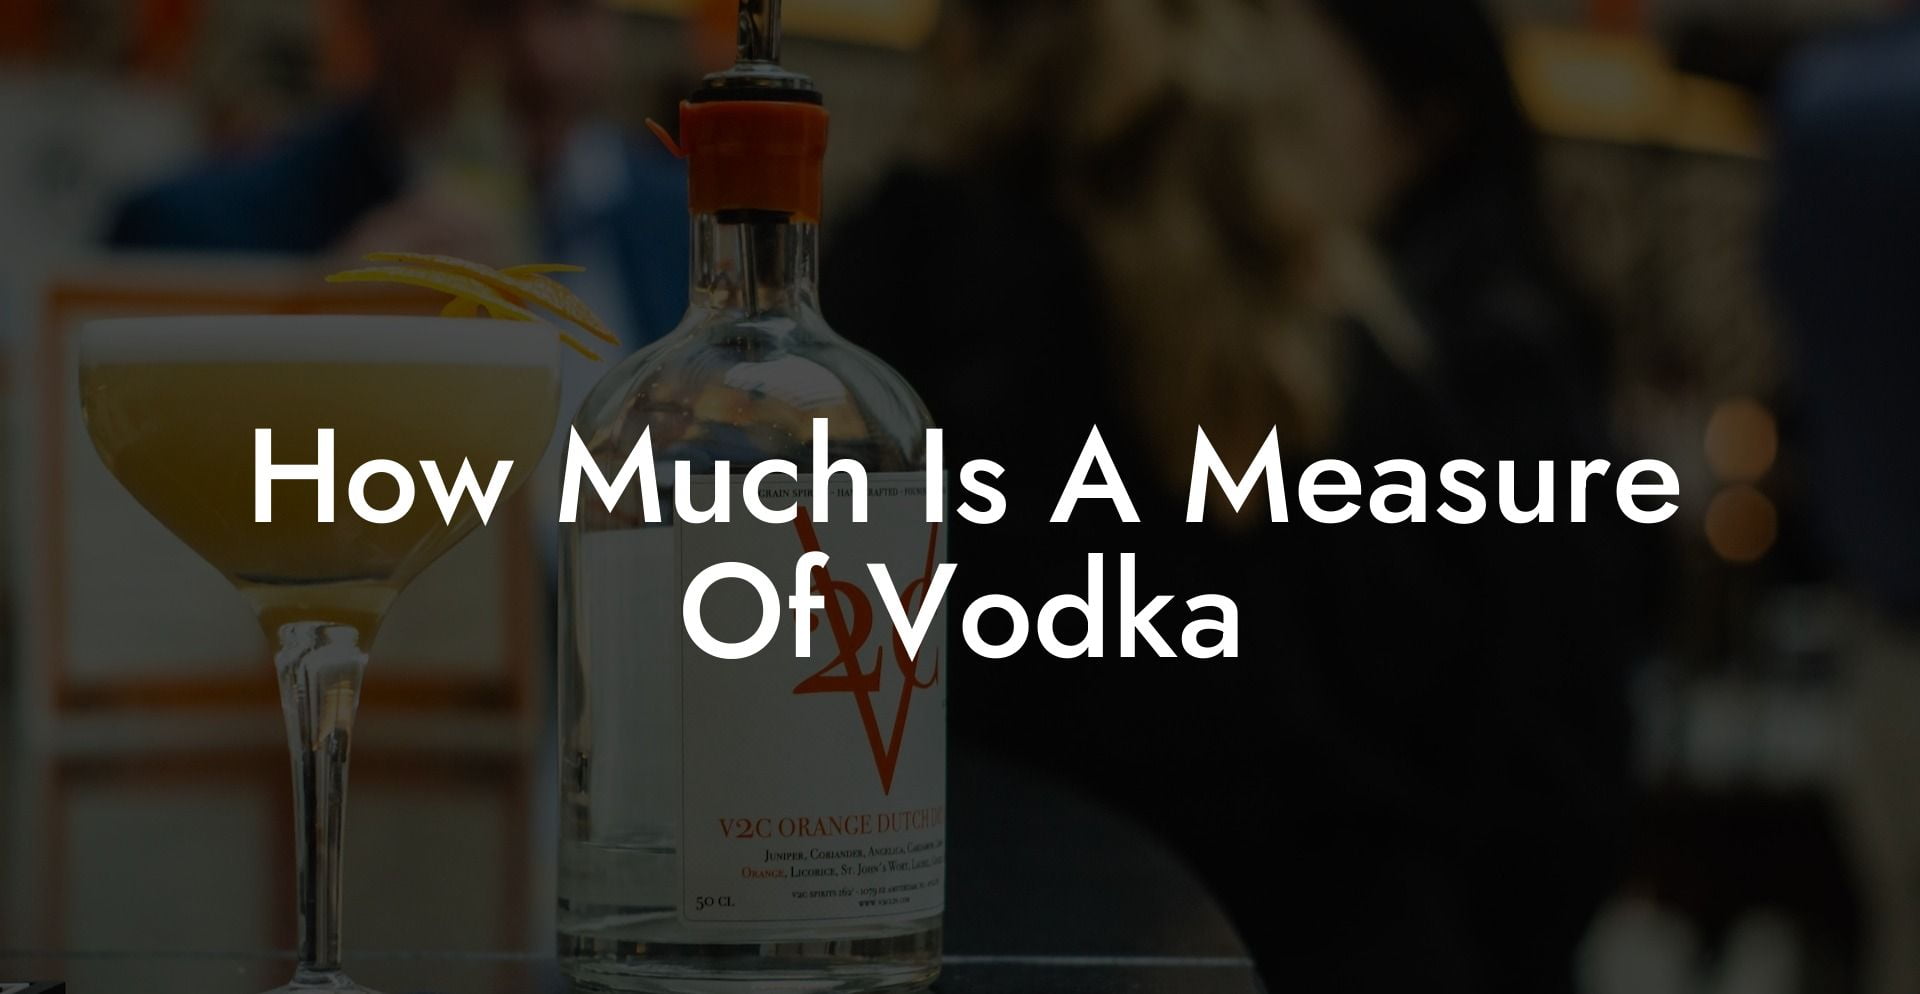 How Much Is A Measure Of Vodka